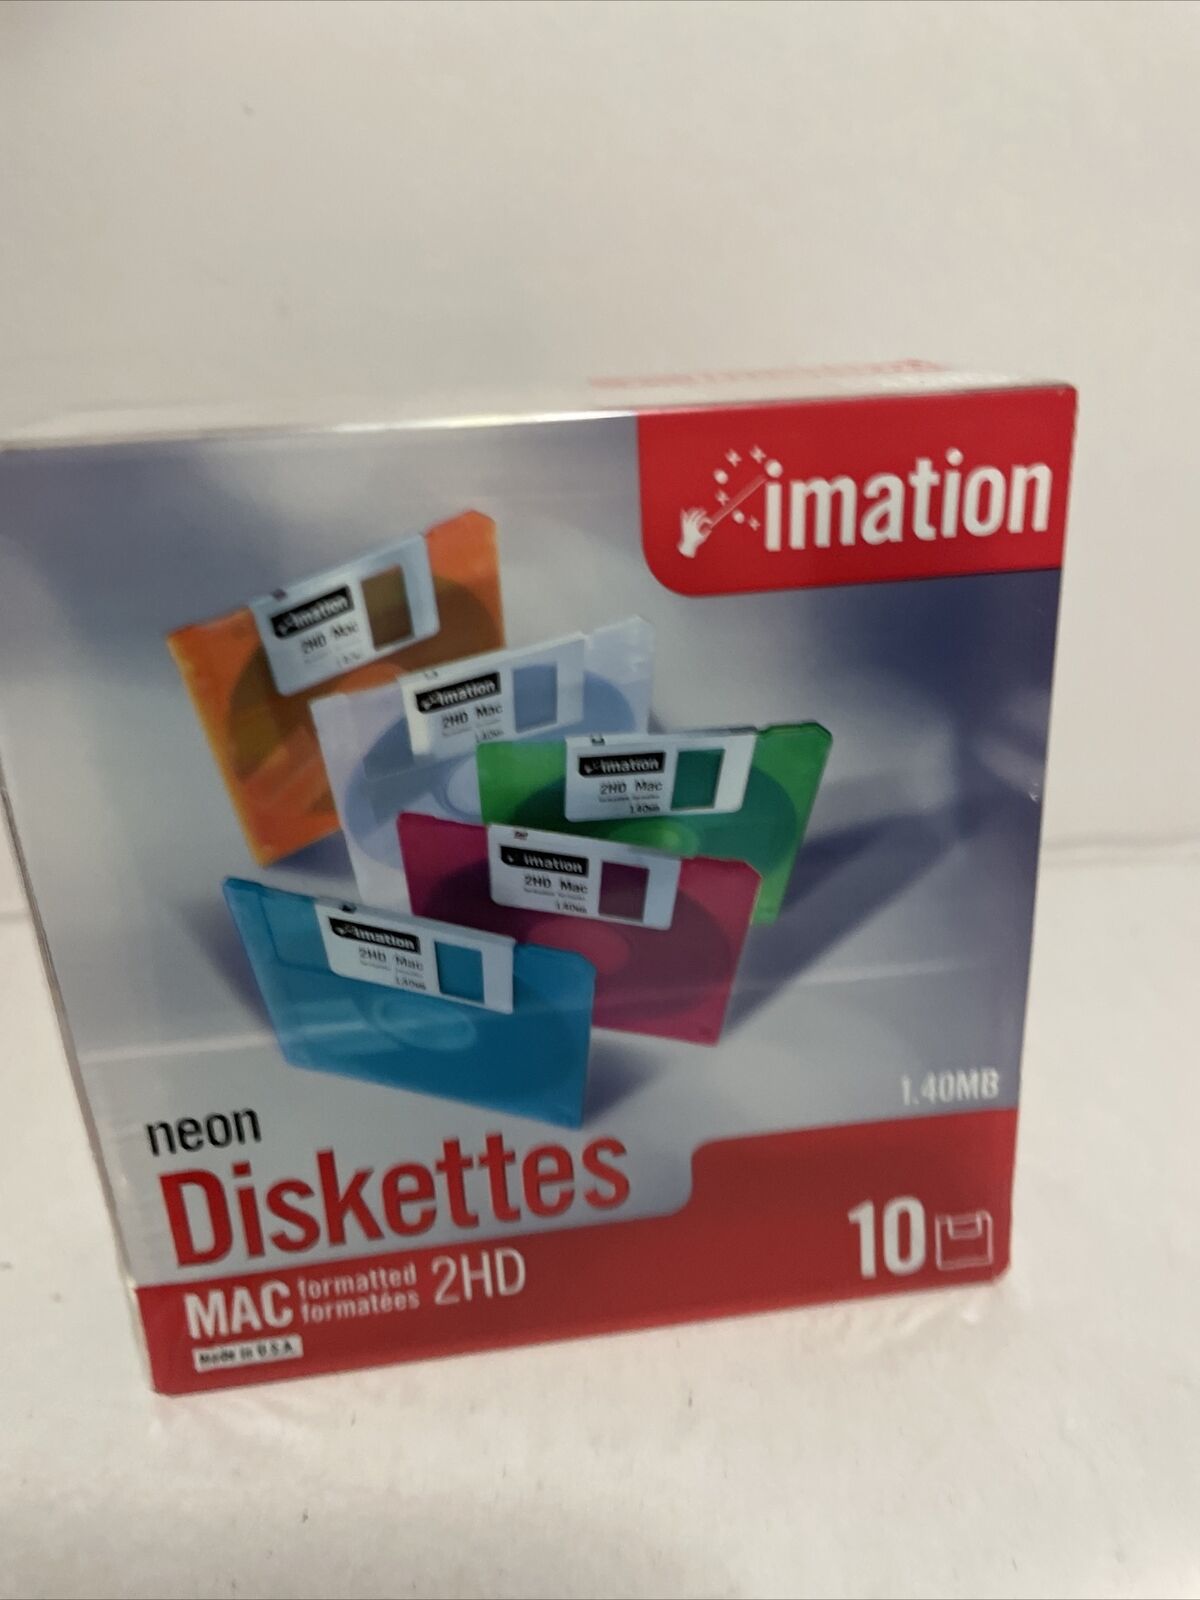 Imation Neon Diskettes MAC Formatted 2HD 1.40 MB 3.5